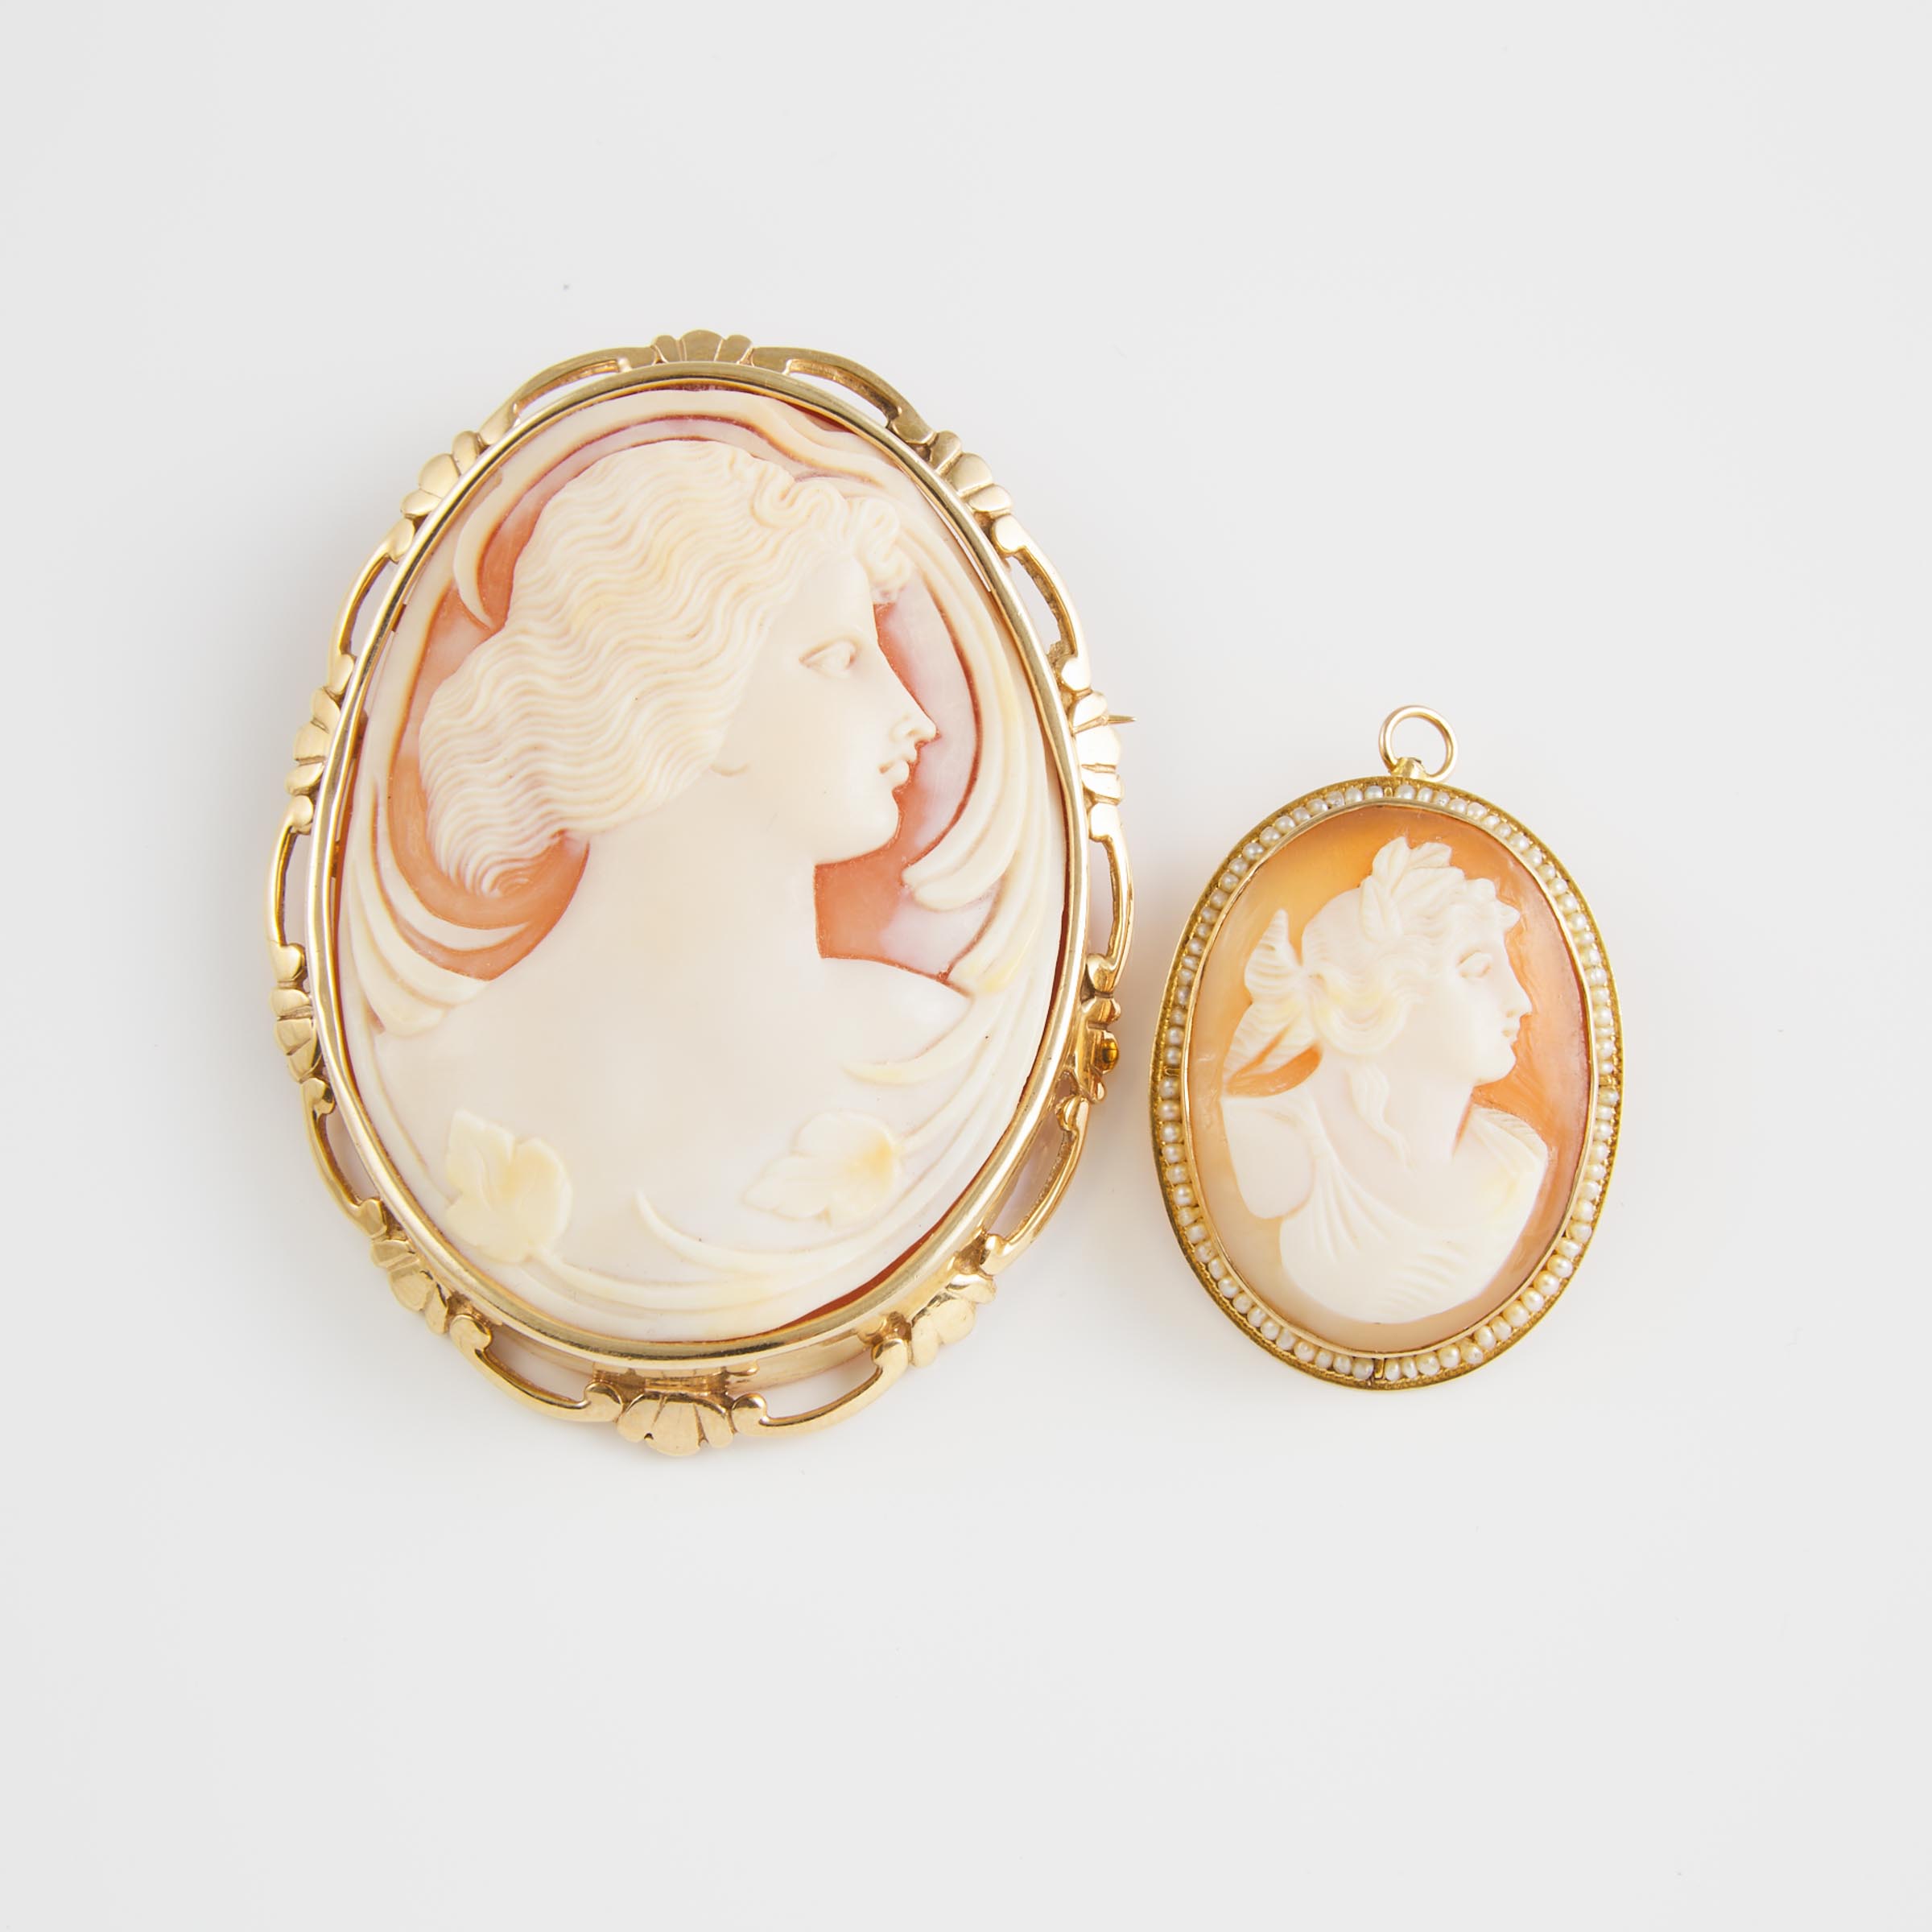 Two Oval Carved Shell Cameos